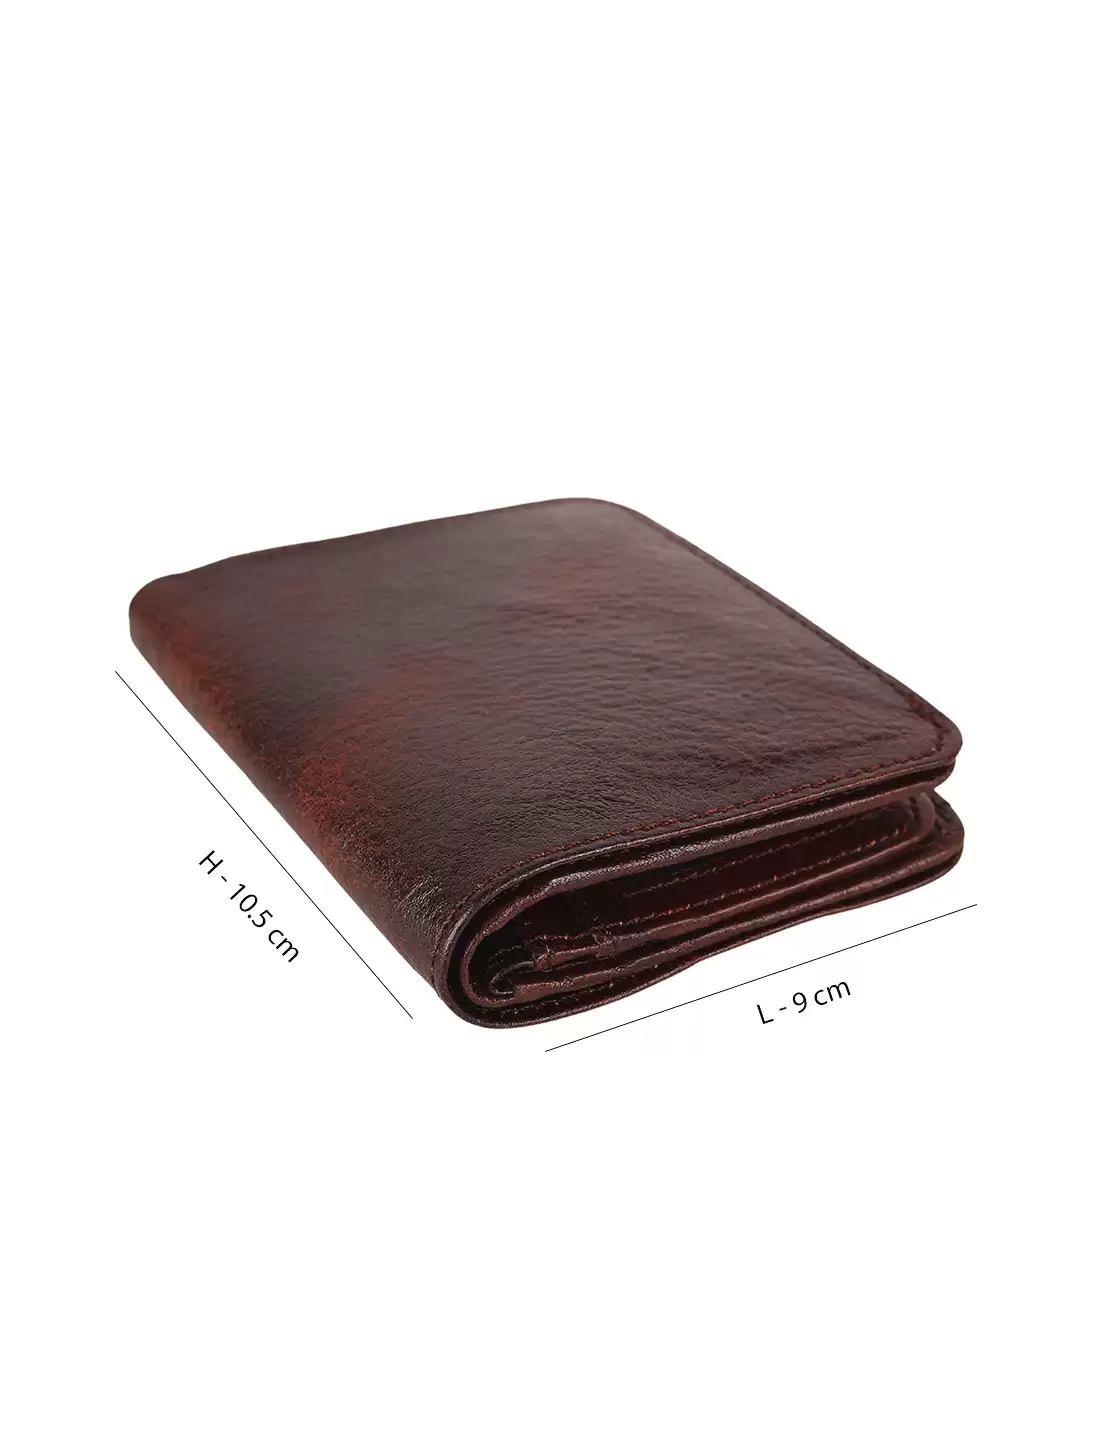 YELLOW GENUINE LEATHER MENS PURSE WALLET MONEY CARD HOLDER SLIM  TRI-FOLD-PERFECT CORPORATE, VALENTINE, BIRTHDAY, ANNIVERSARY, THANKSGIVING  GIFT FOR MEN 44 : Amazon.in: Bags, Wallets and Luggage